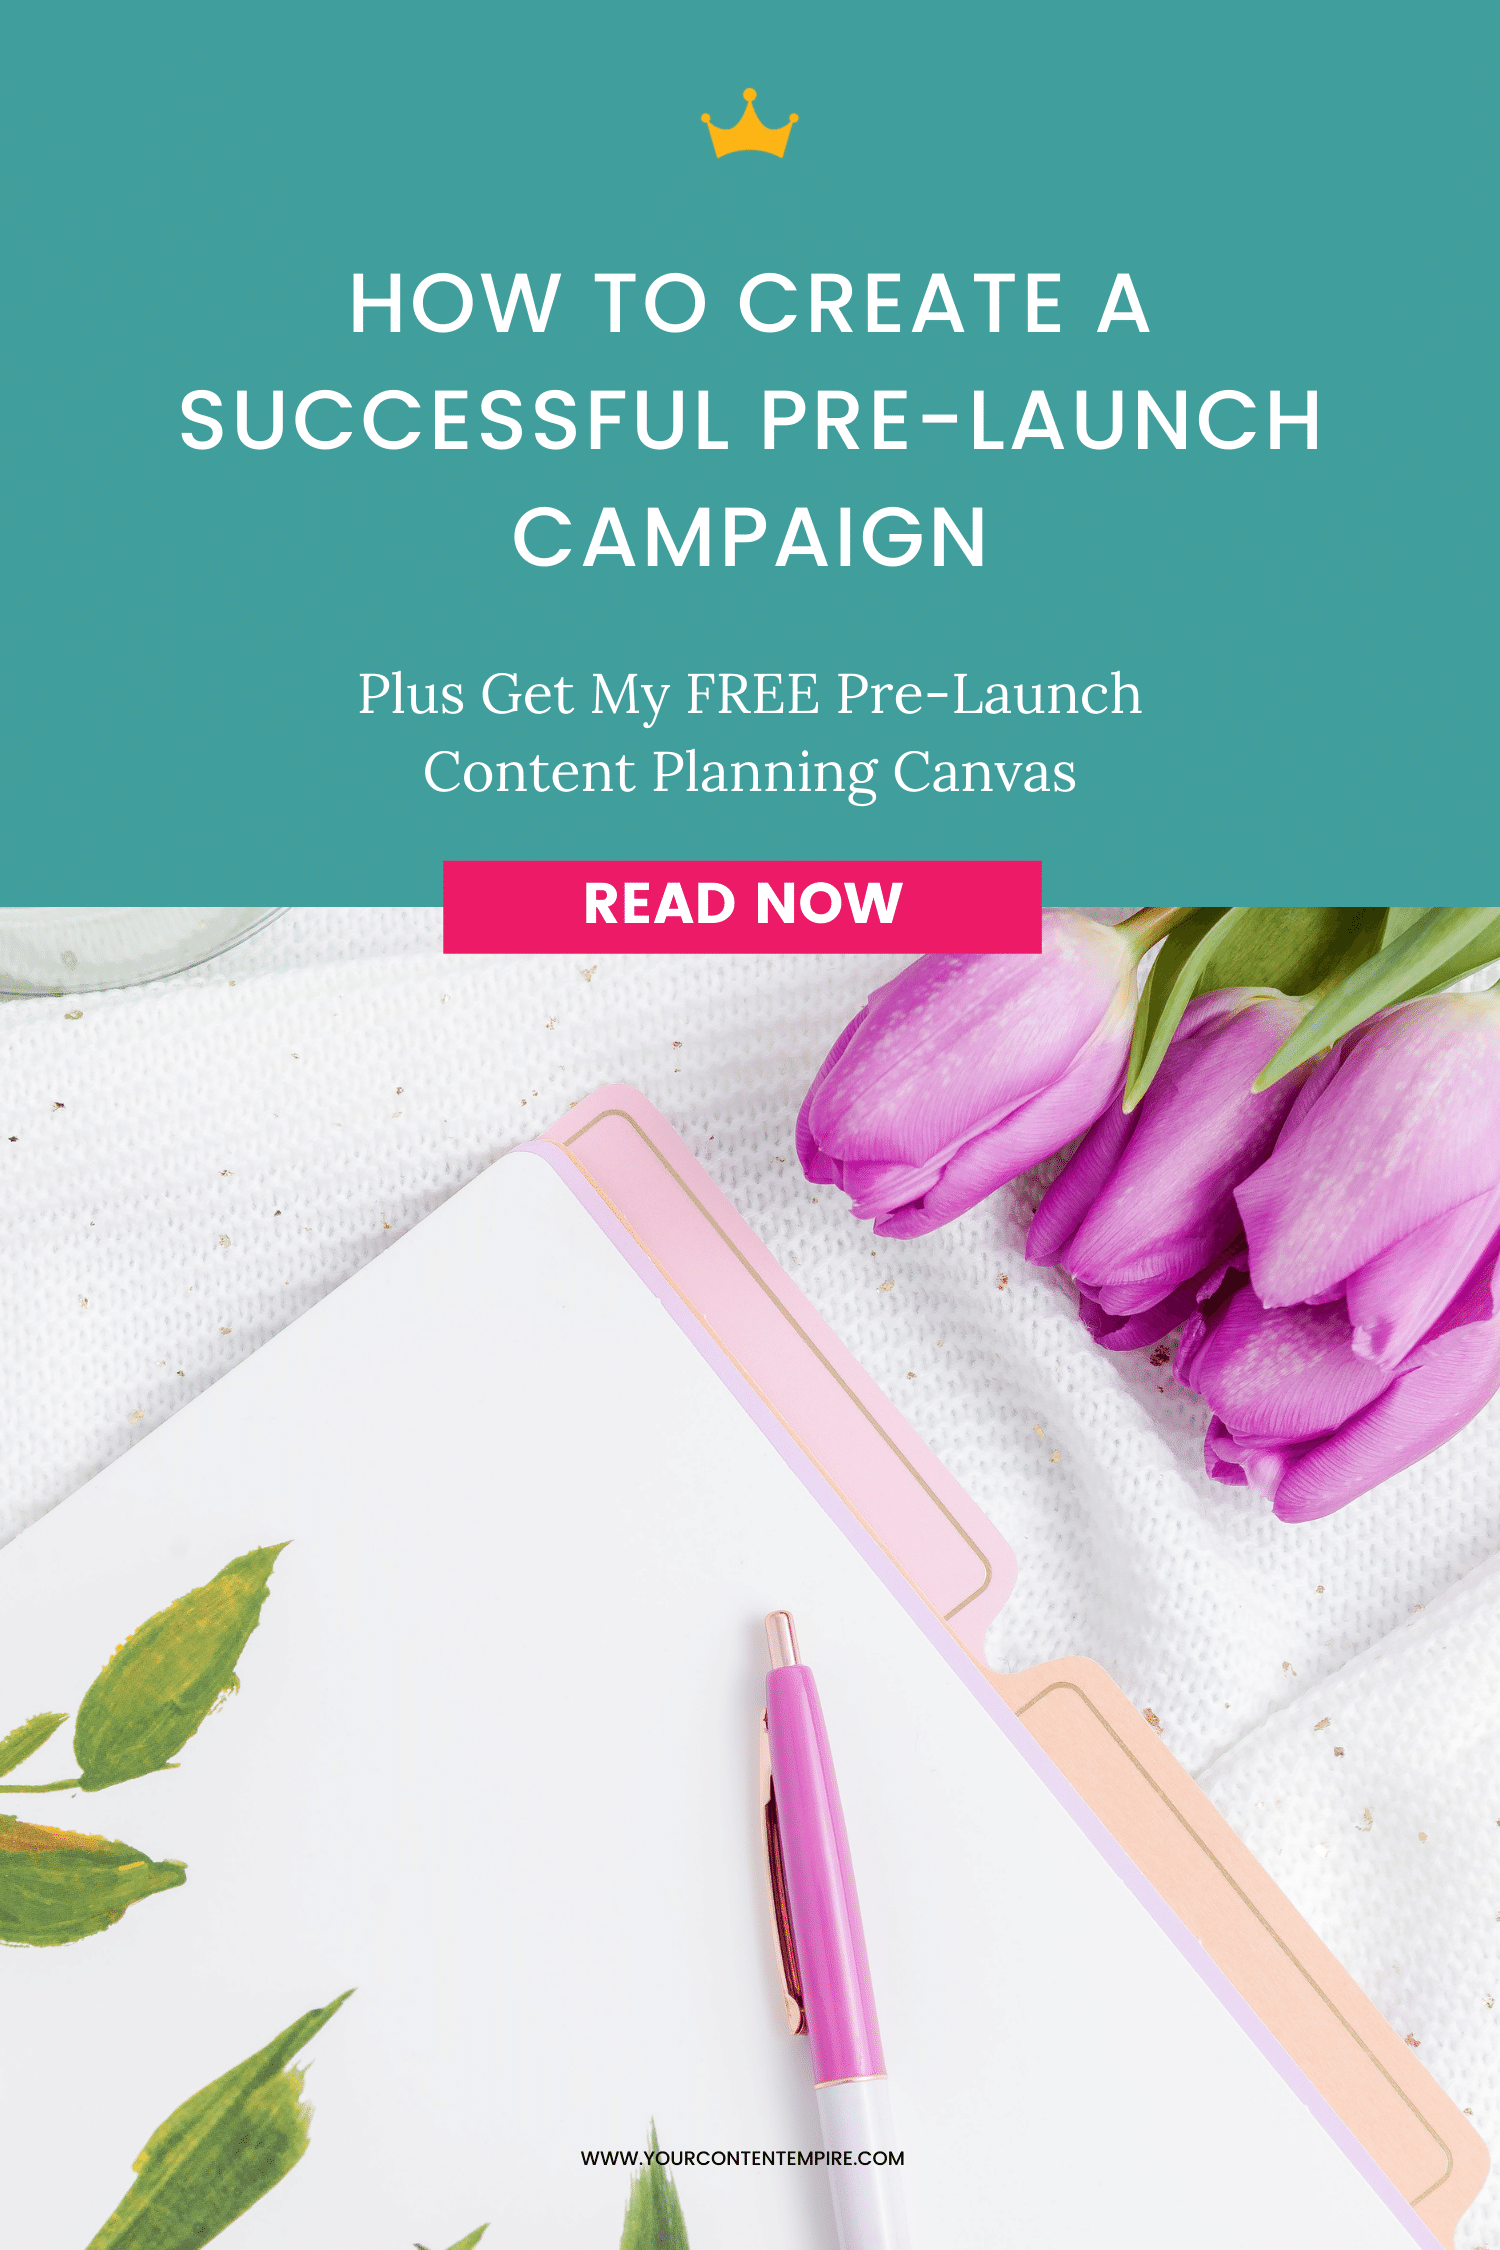 How to Create a Successful Pre-Launch Campaign